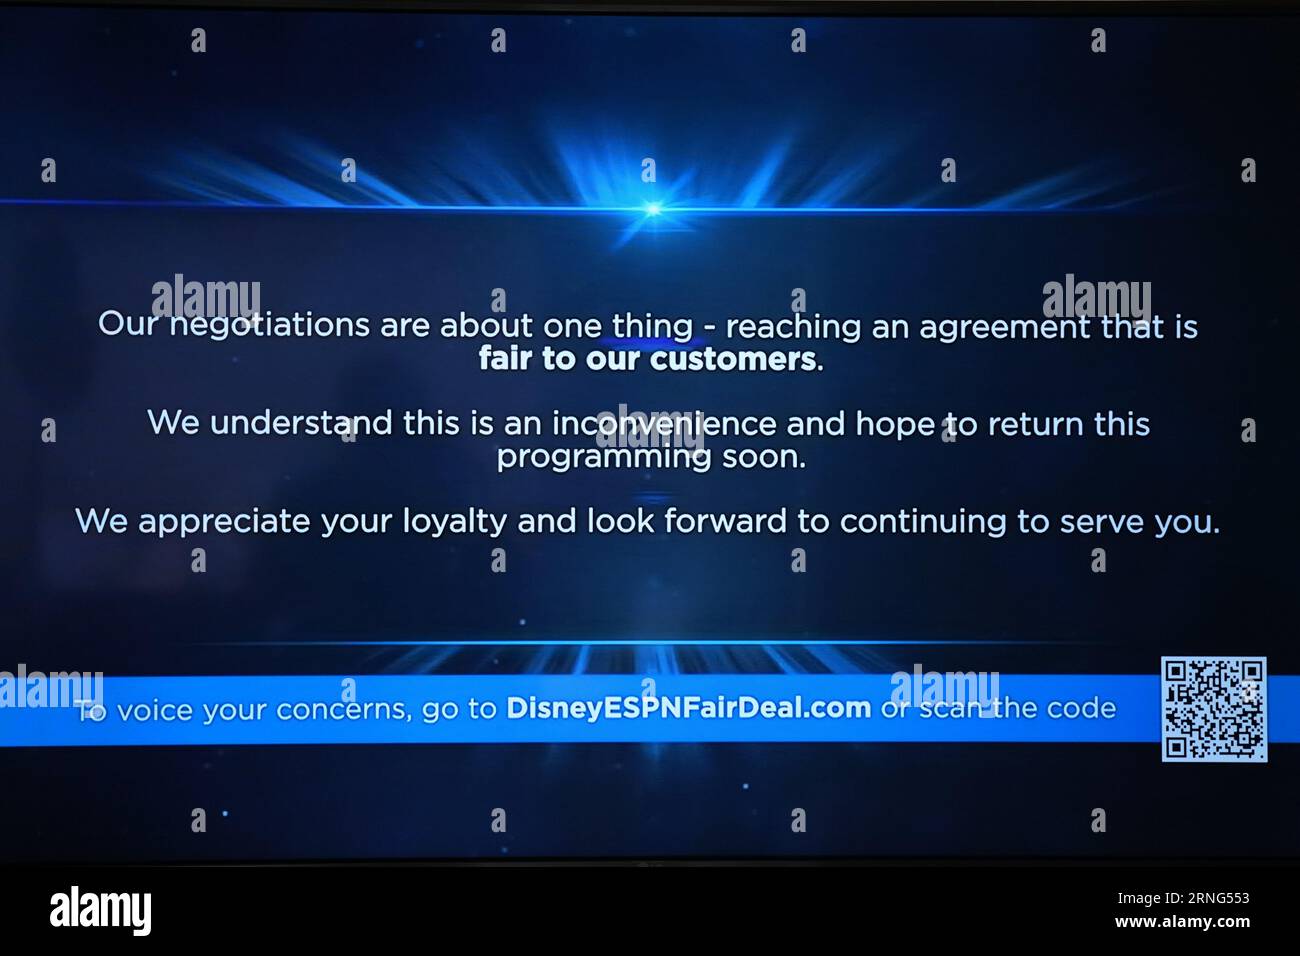 A message on a Disney-owned channel on Spectrum